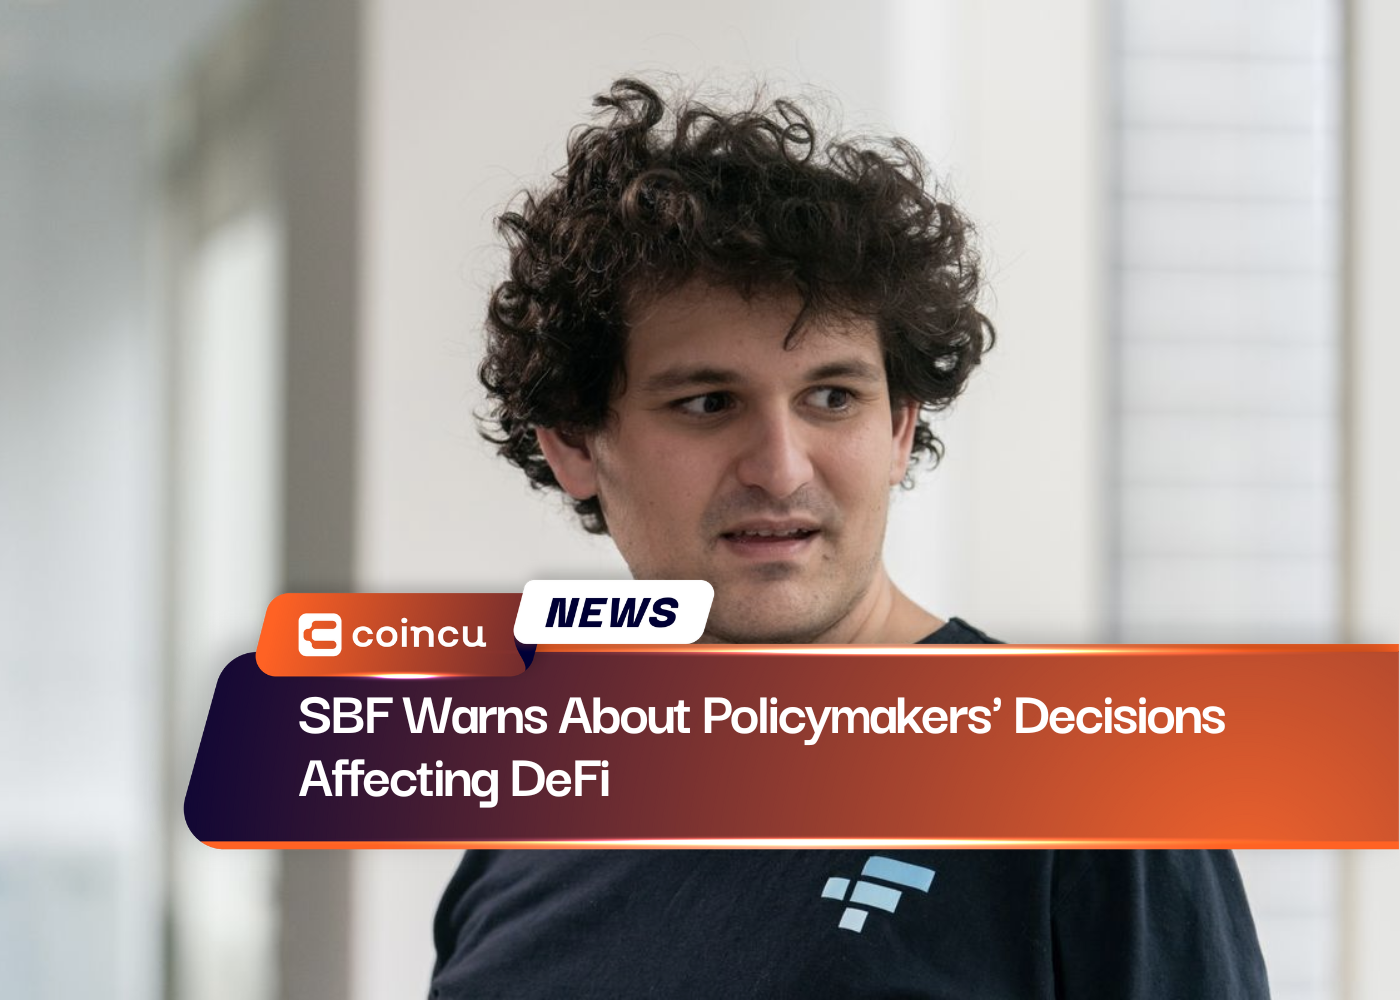 SBF Warns About Policymakers' Decisions Affecting DeFi